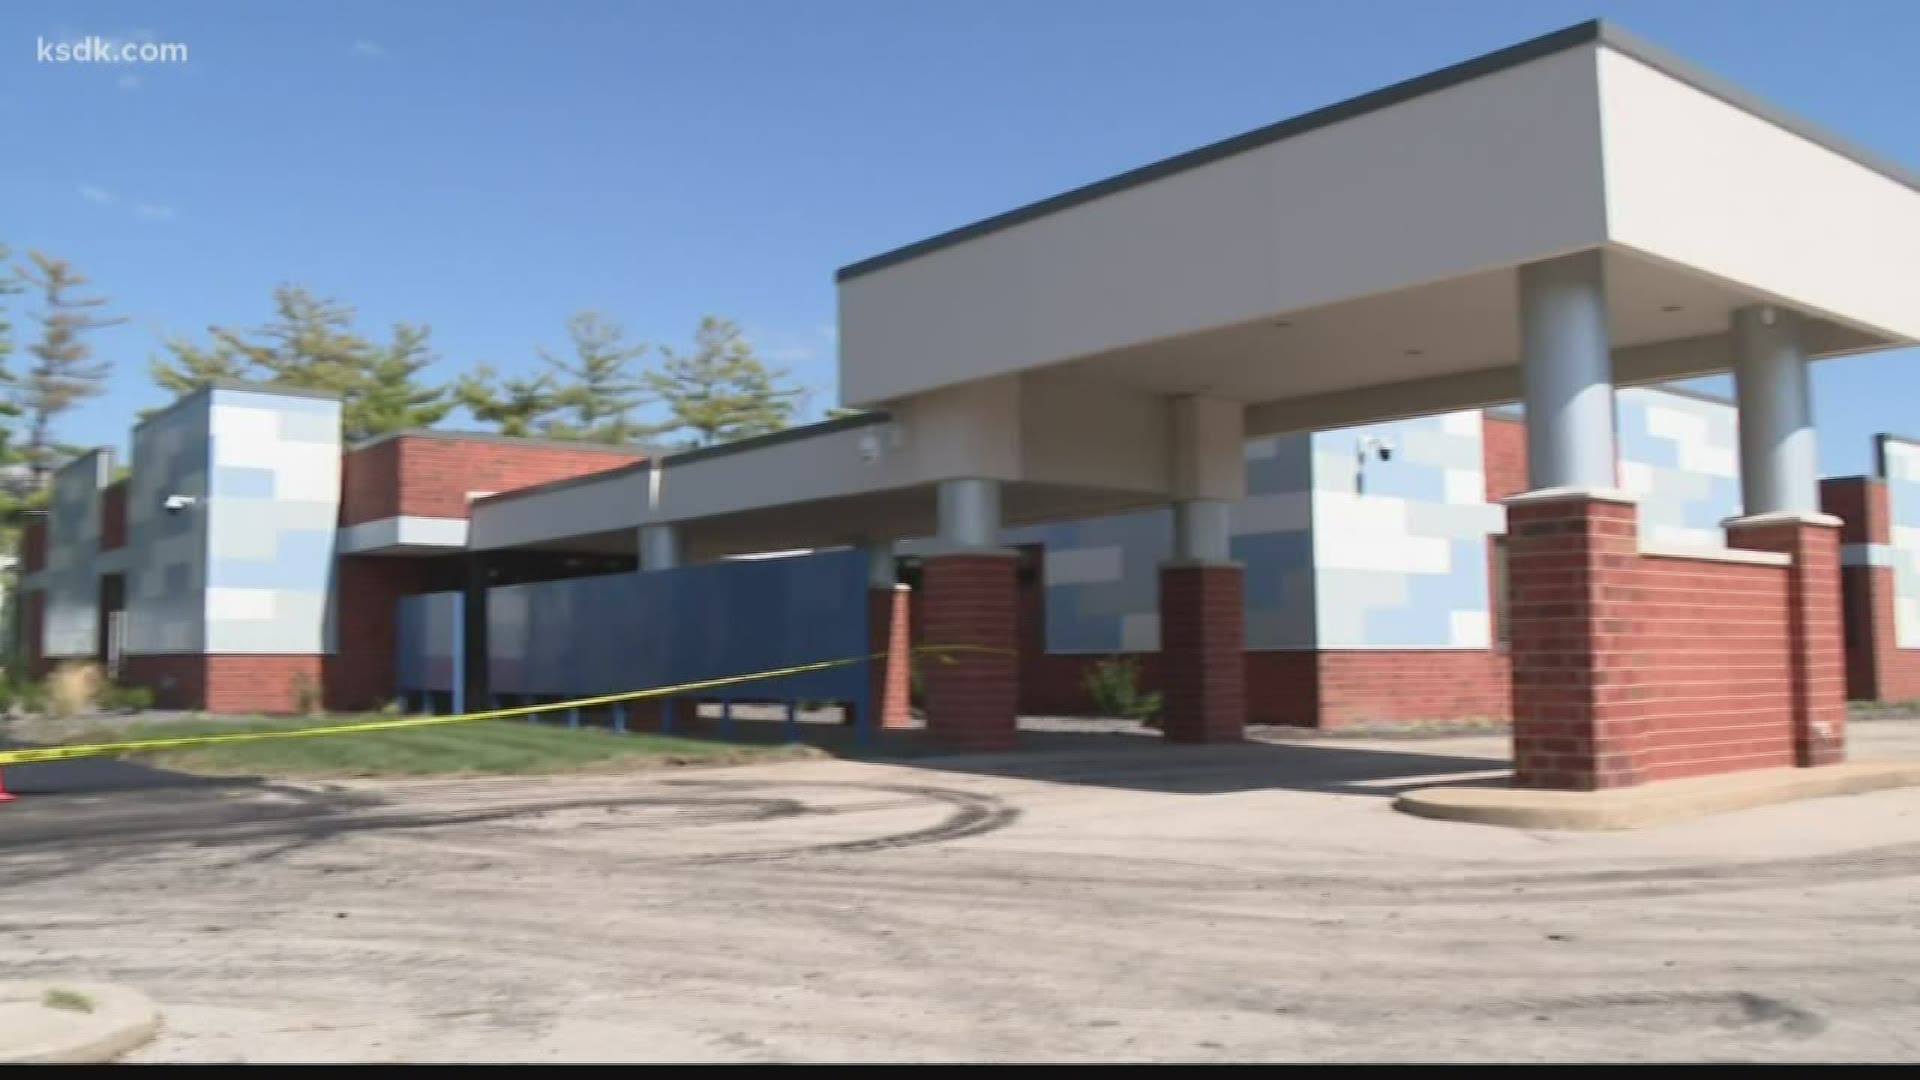 The massive abortion clinic quietly built over the last year by Planned Parenthood officially opens Monday. The facility is located in Fairview Heights, Illinois.